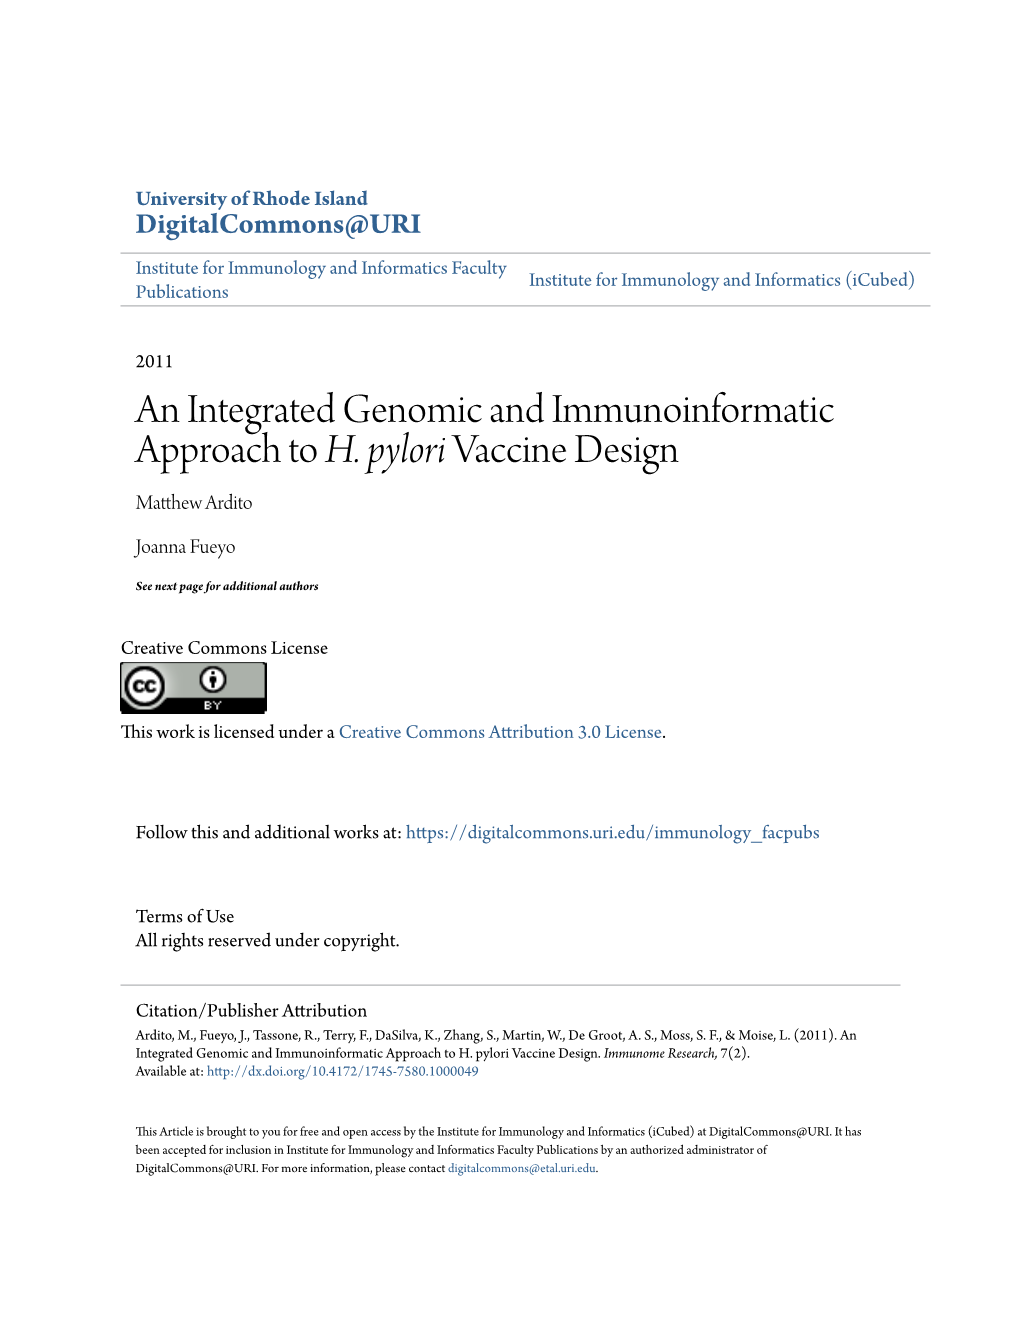 An Integrated Genomic and Immunoinformatic Approach to H